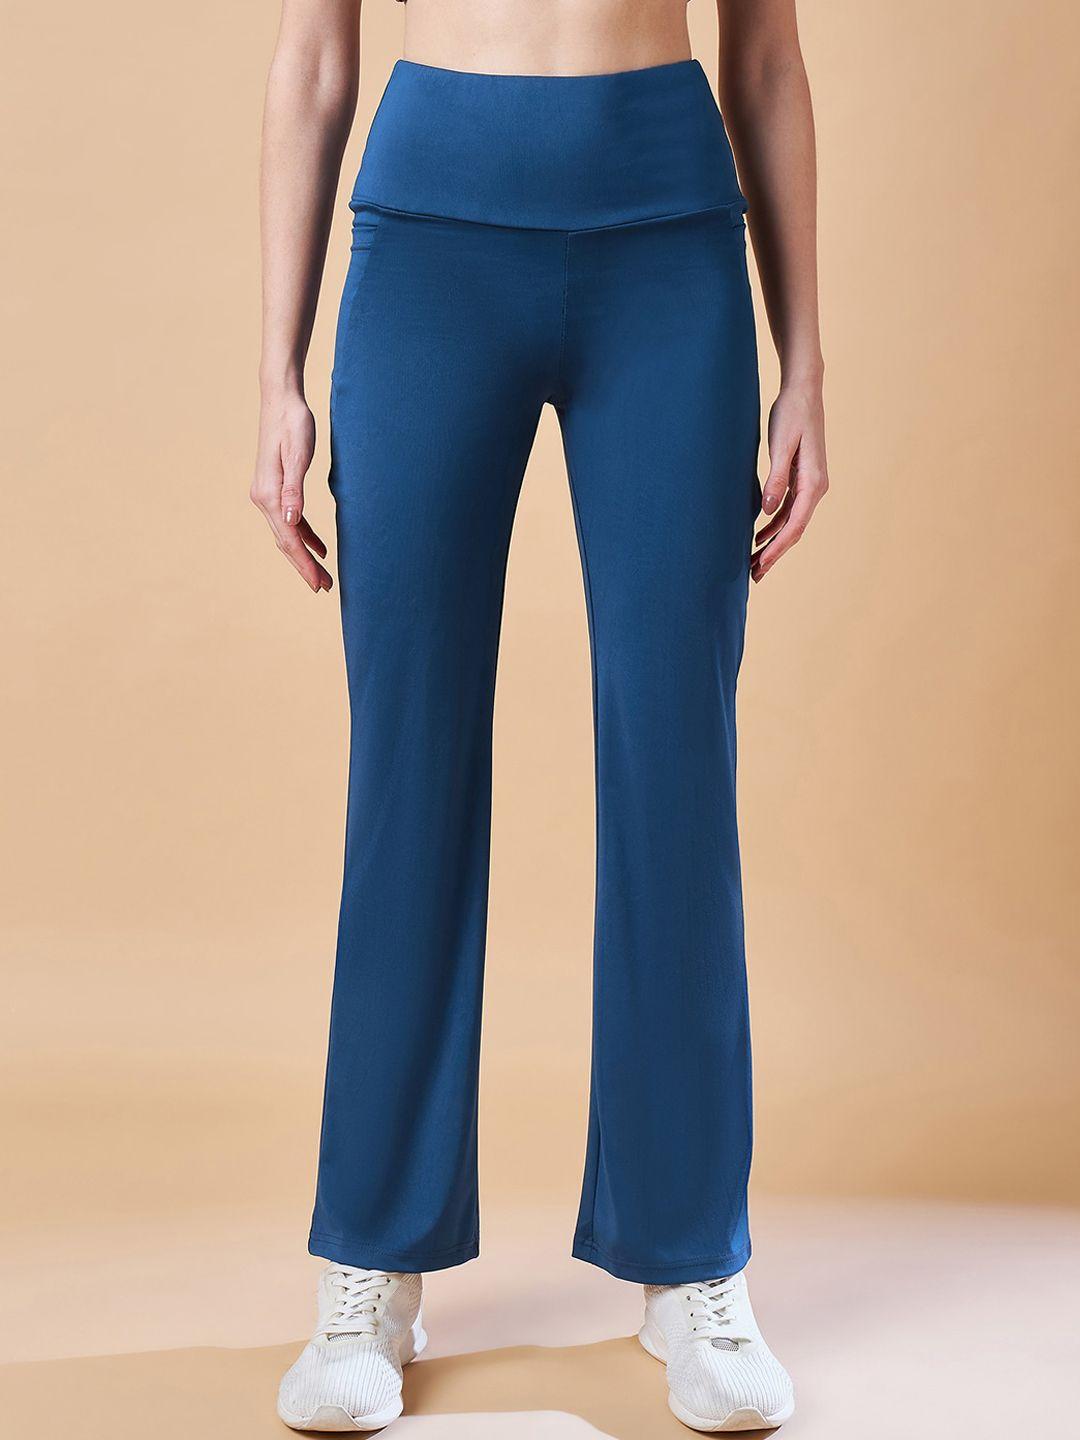 color capital mid-rise track pant